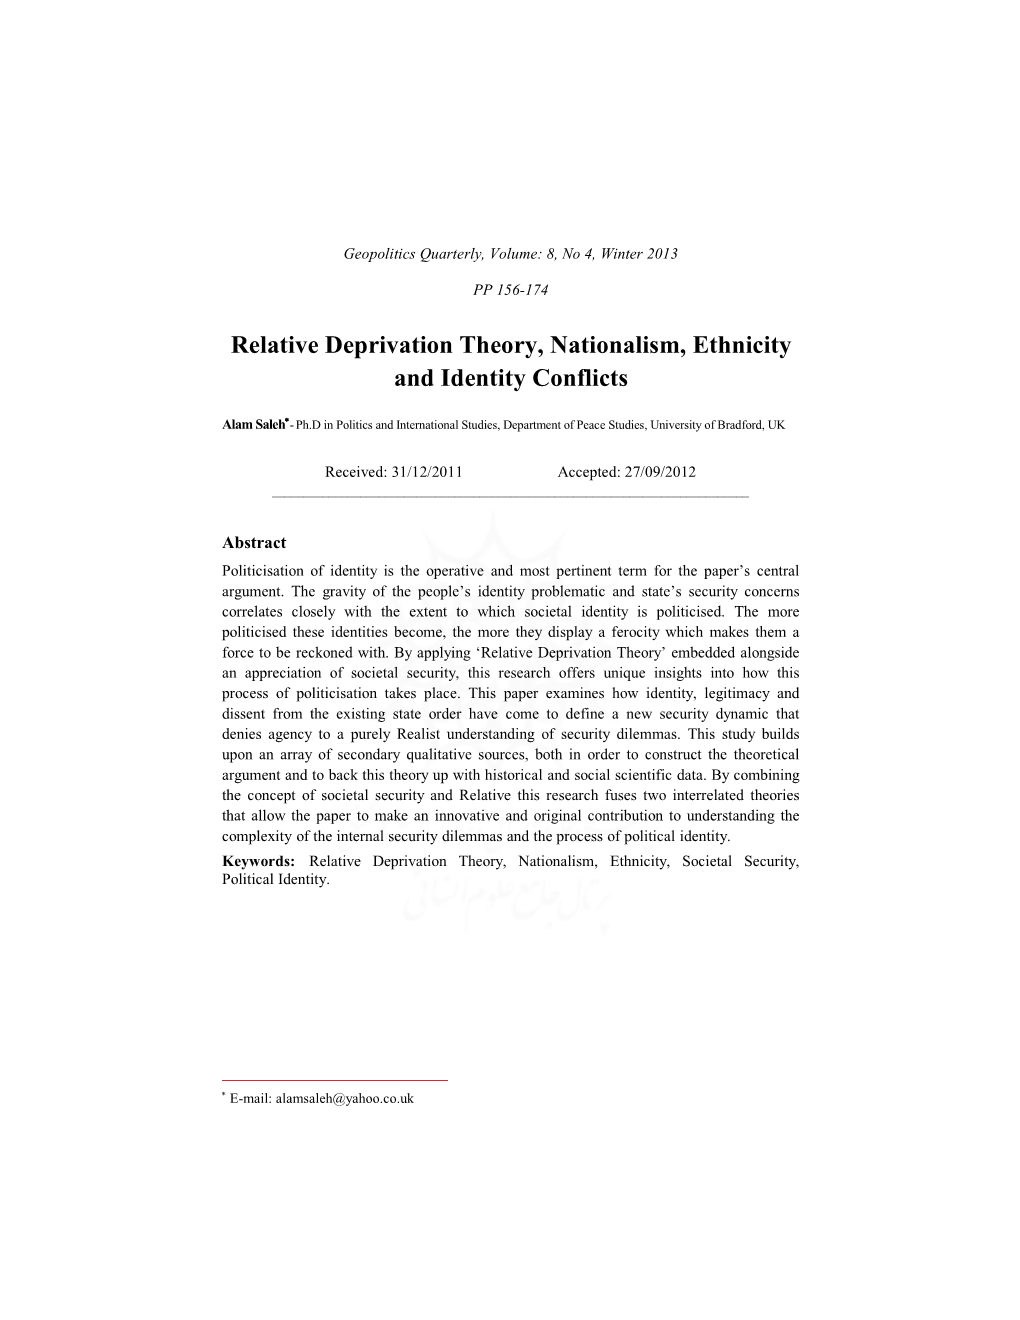 Relative Deprivation Theory, Nationalism, Ethnicity and Identity Conflicts